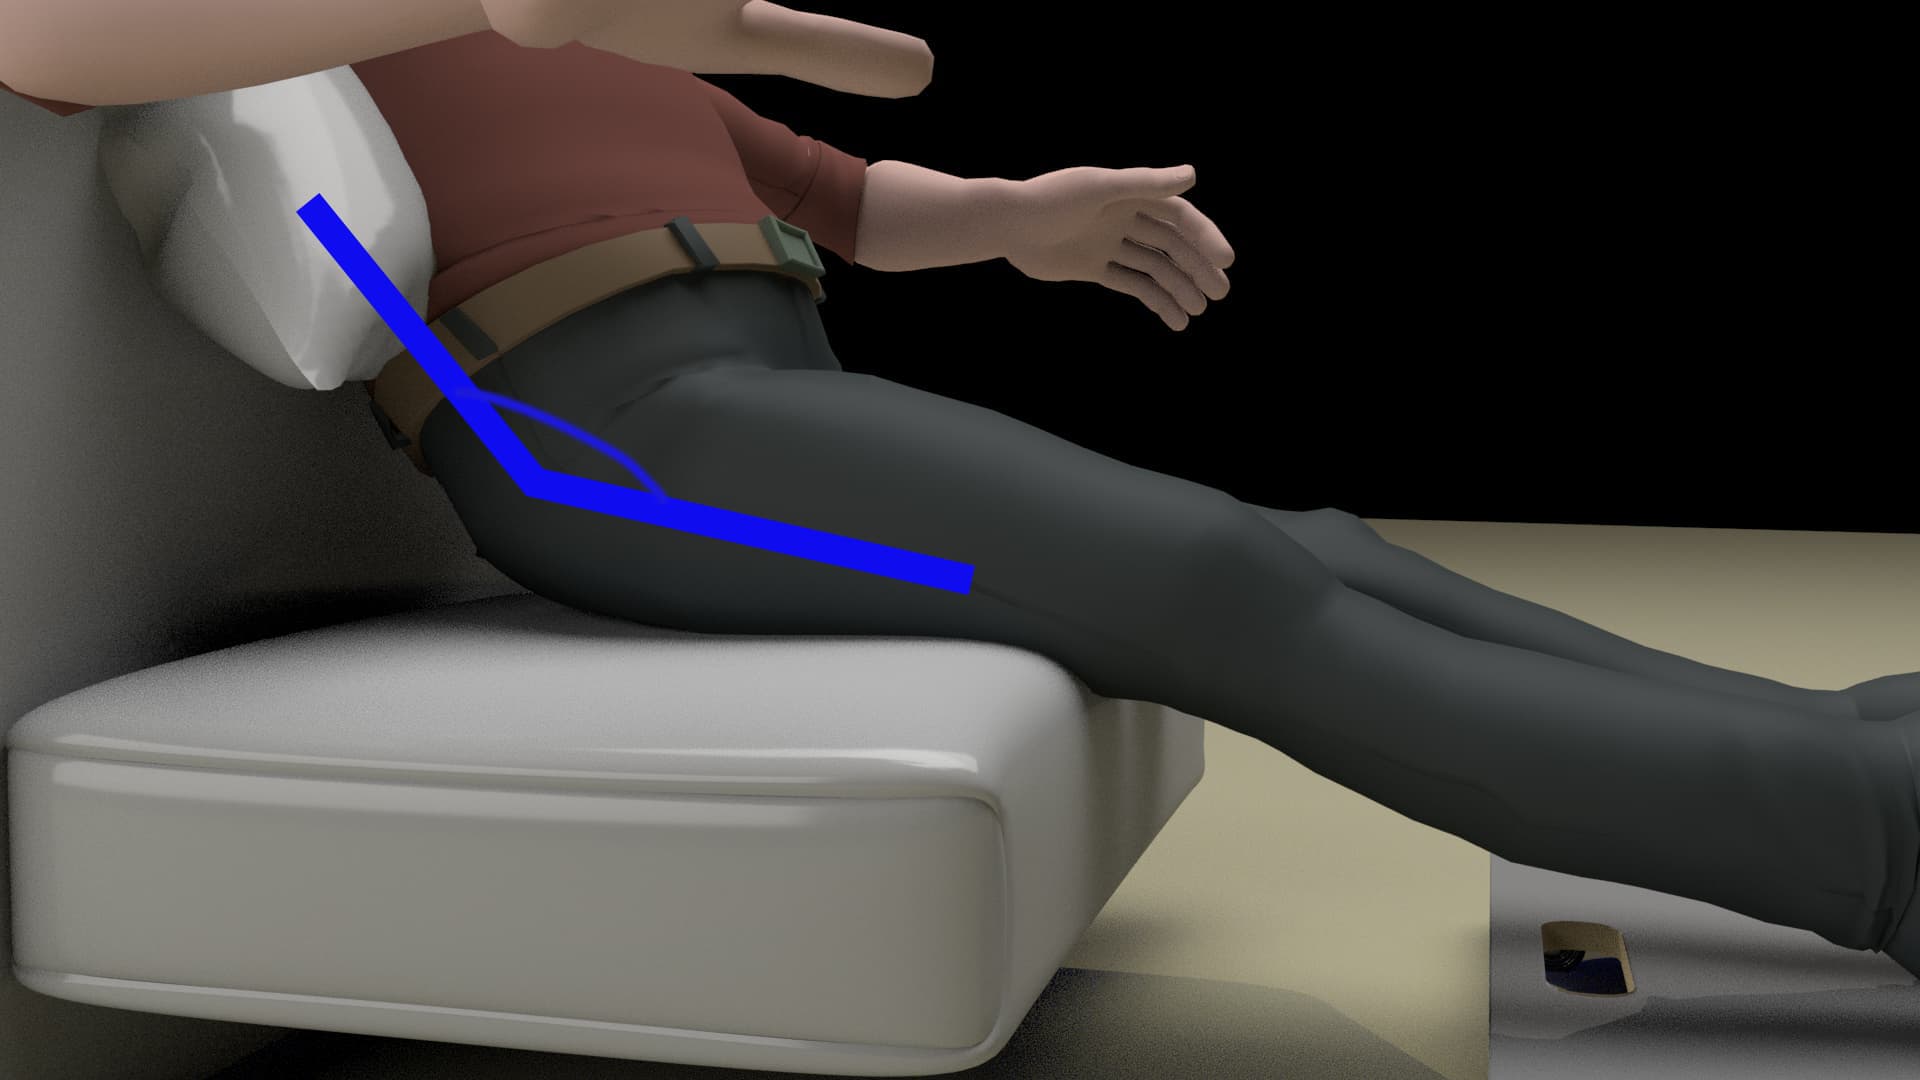 Sitting on a couch with sciatica, herniated disc or DDD